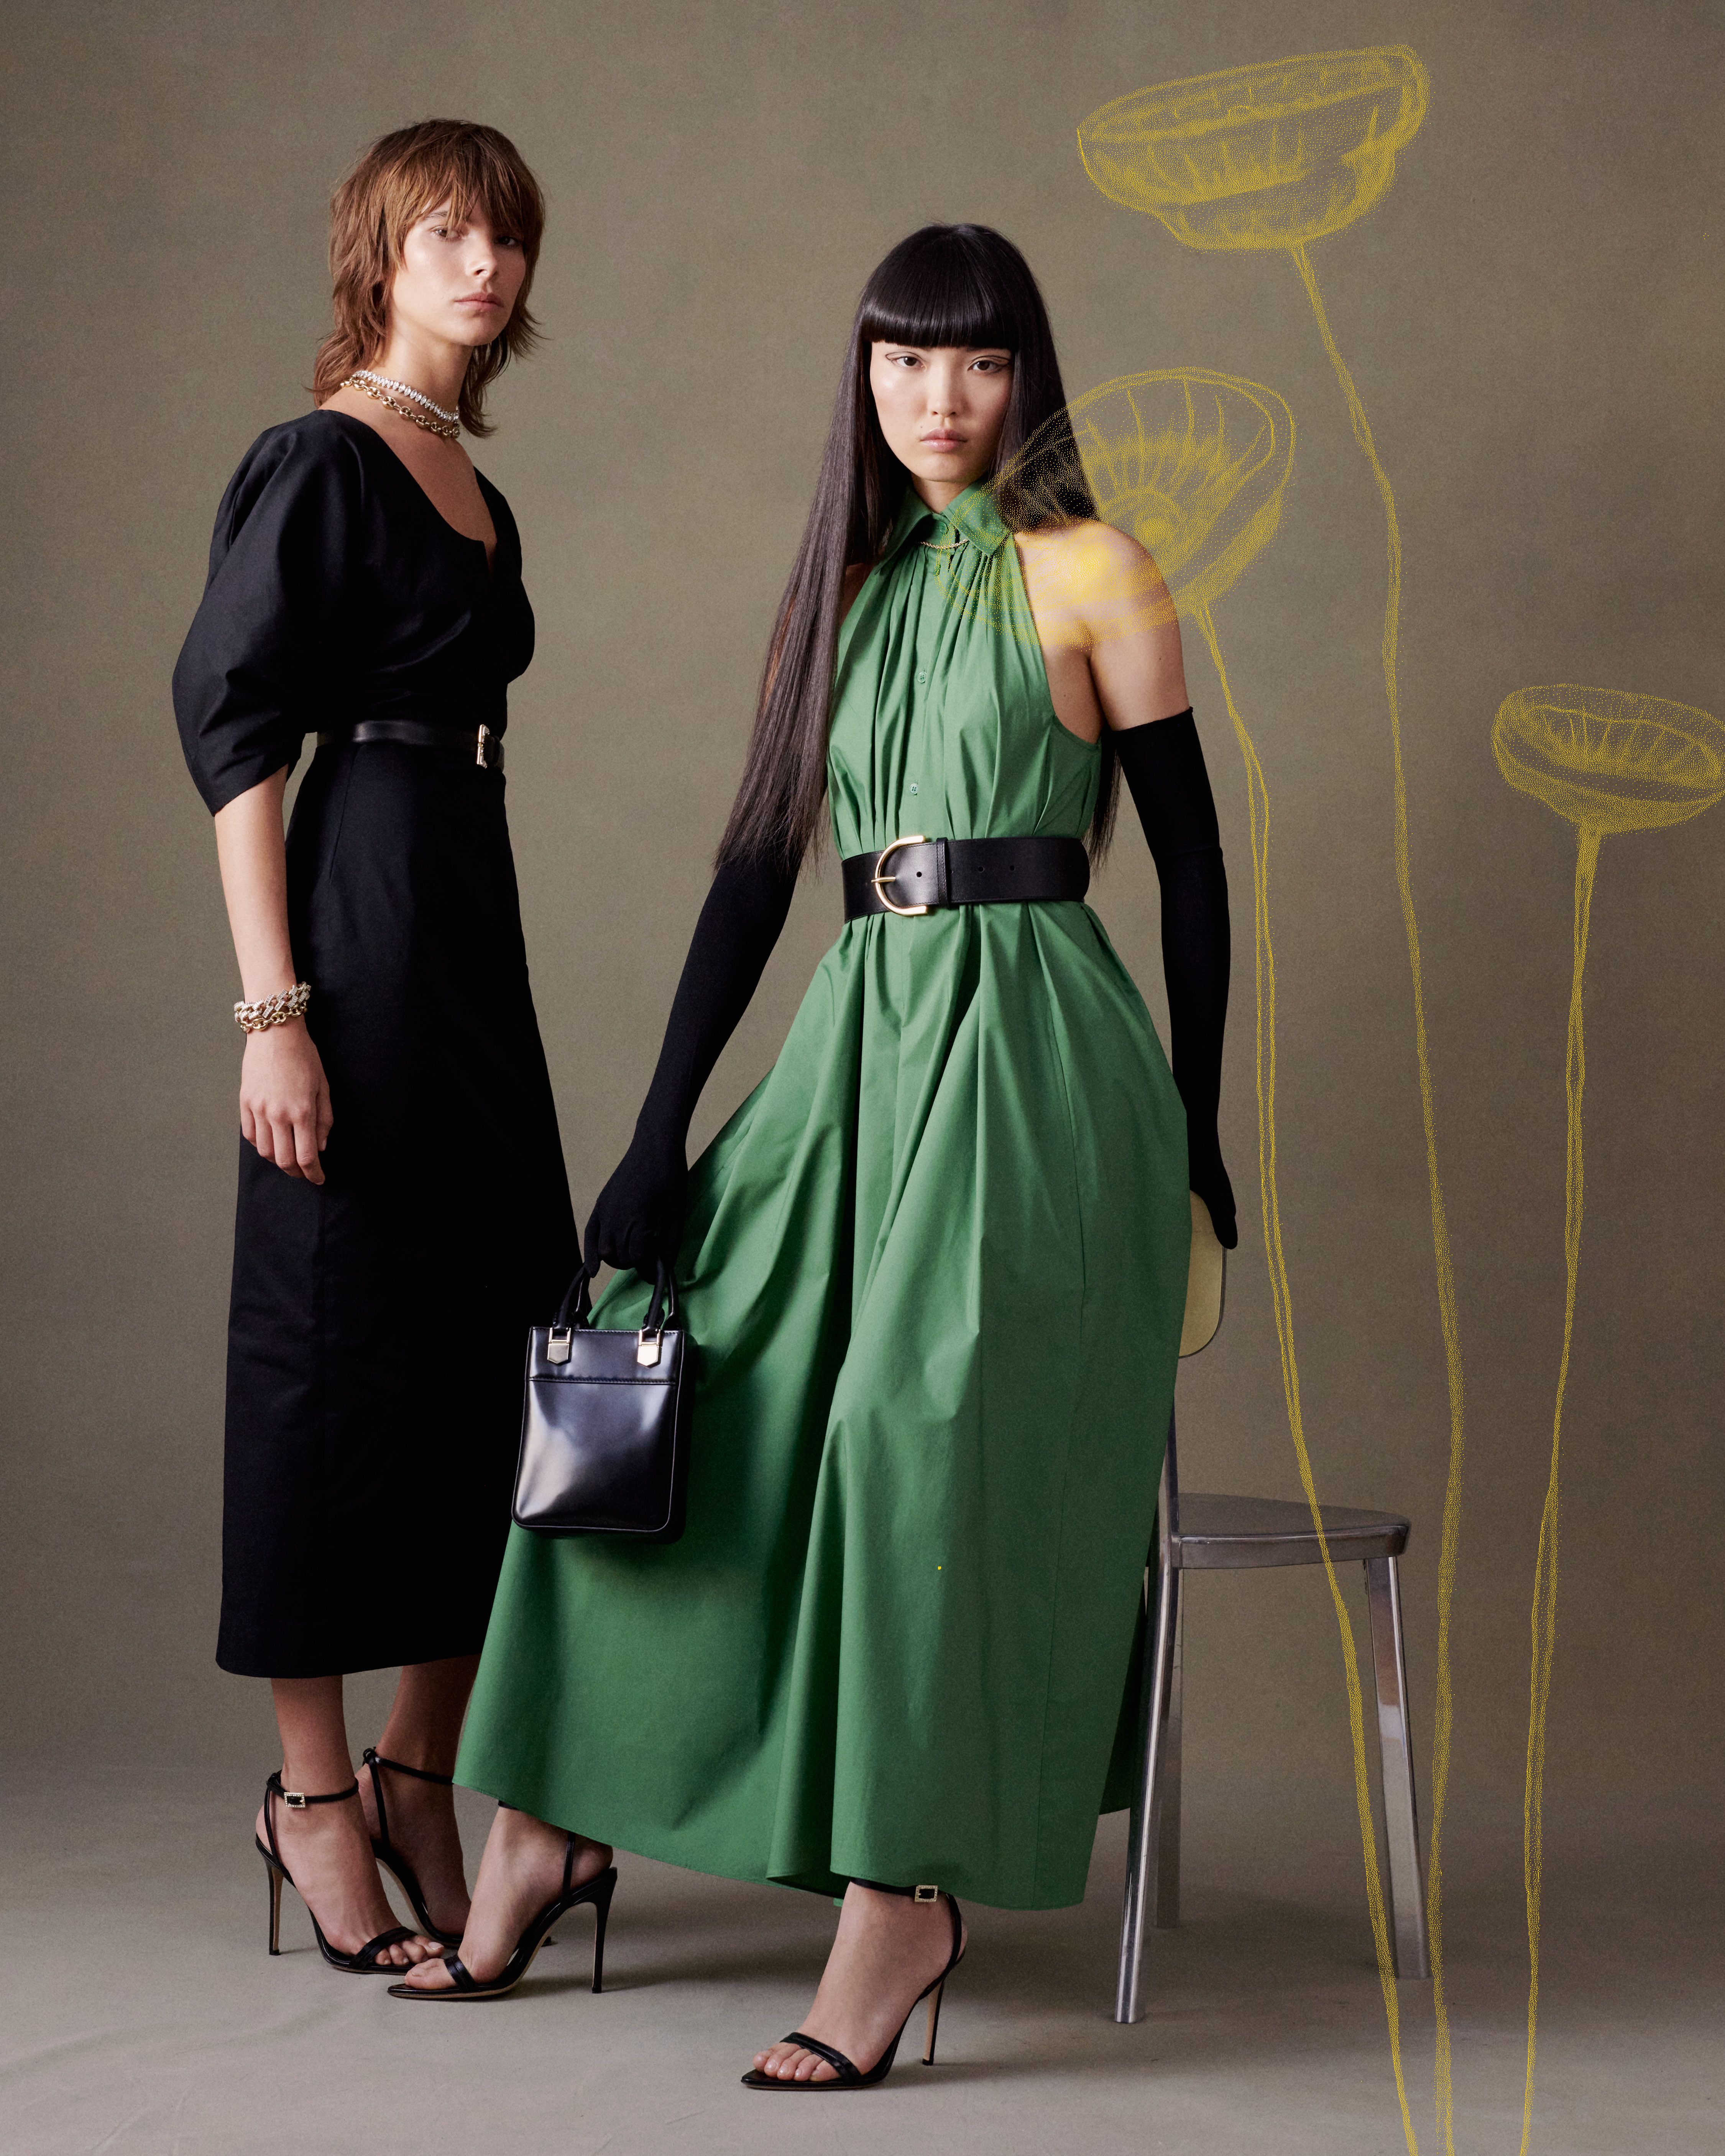 Two models posing wearing green and black full length dresses with yellow poppy illustrations overlaid on top